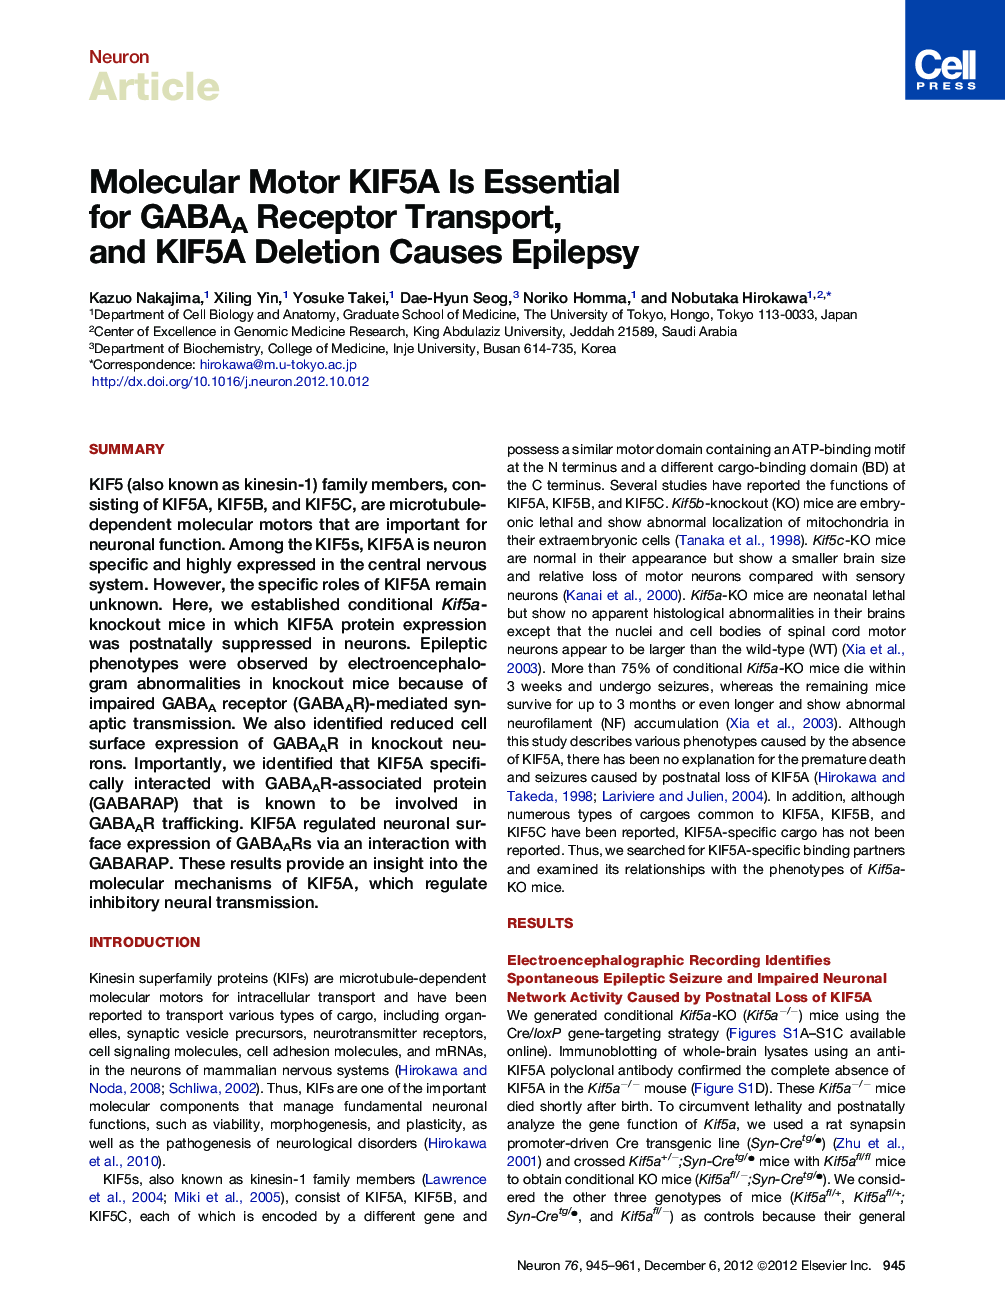 Molecular Motor KIF5A Is Essential for GABAA Receptor Transport, and KIF5A Deletion Causes Epilepsy